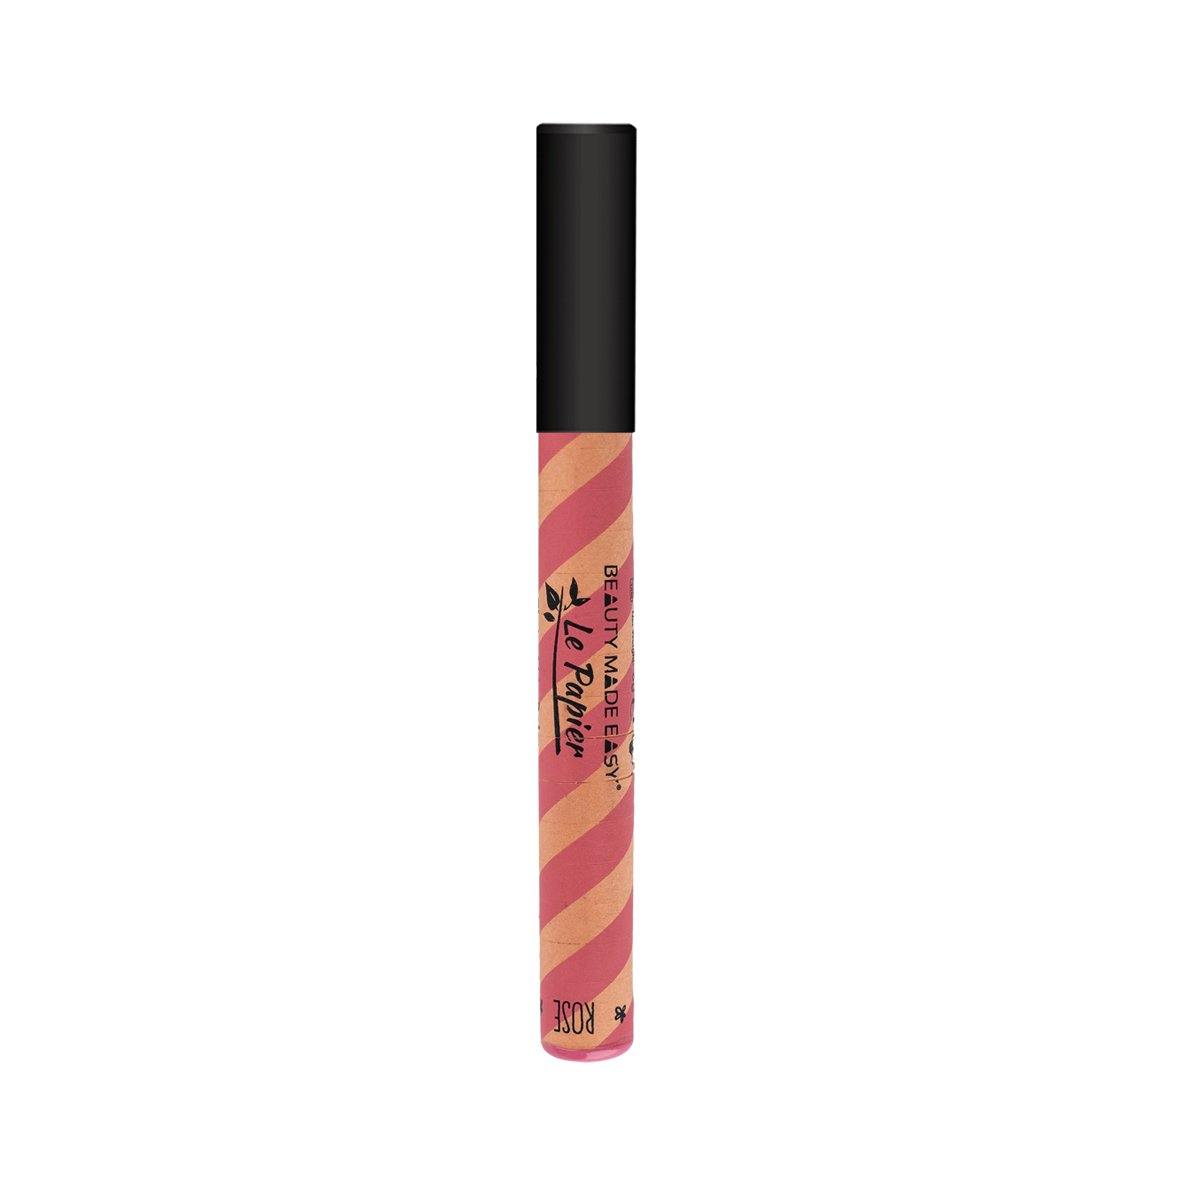 Beauty Made Easy Le Papier Rose Tinted Lip Balm